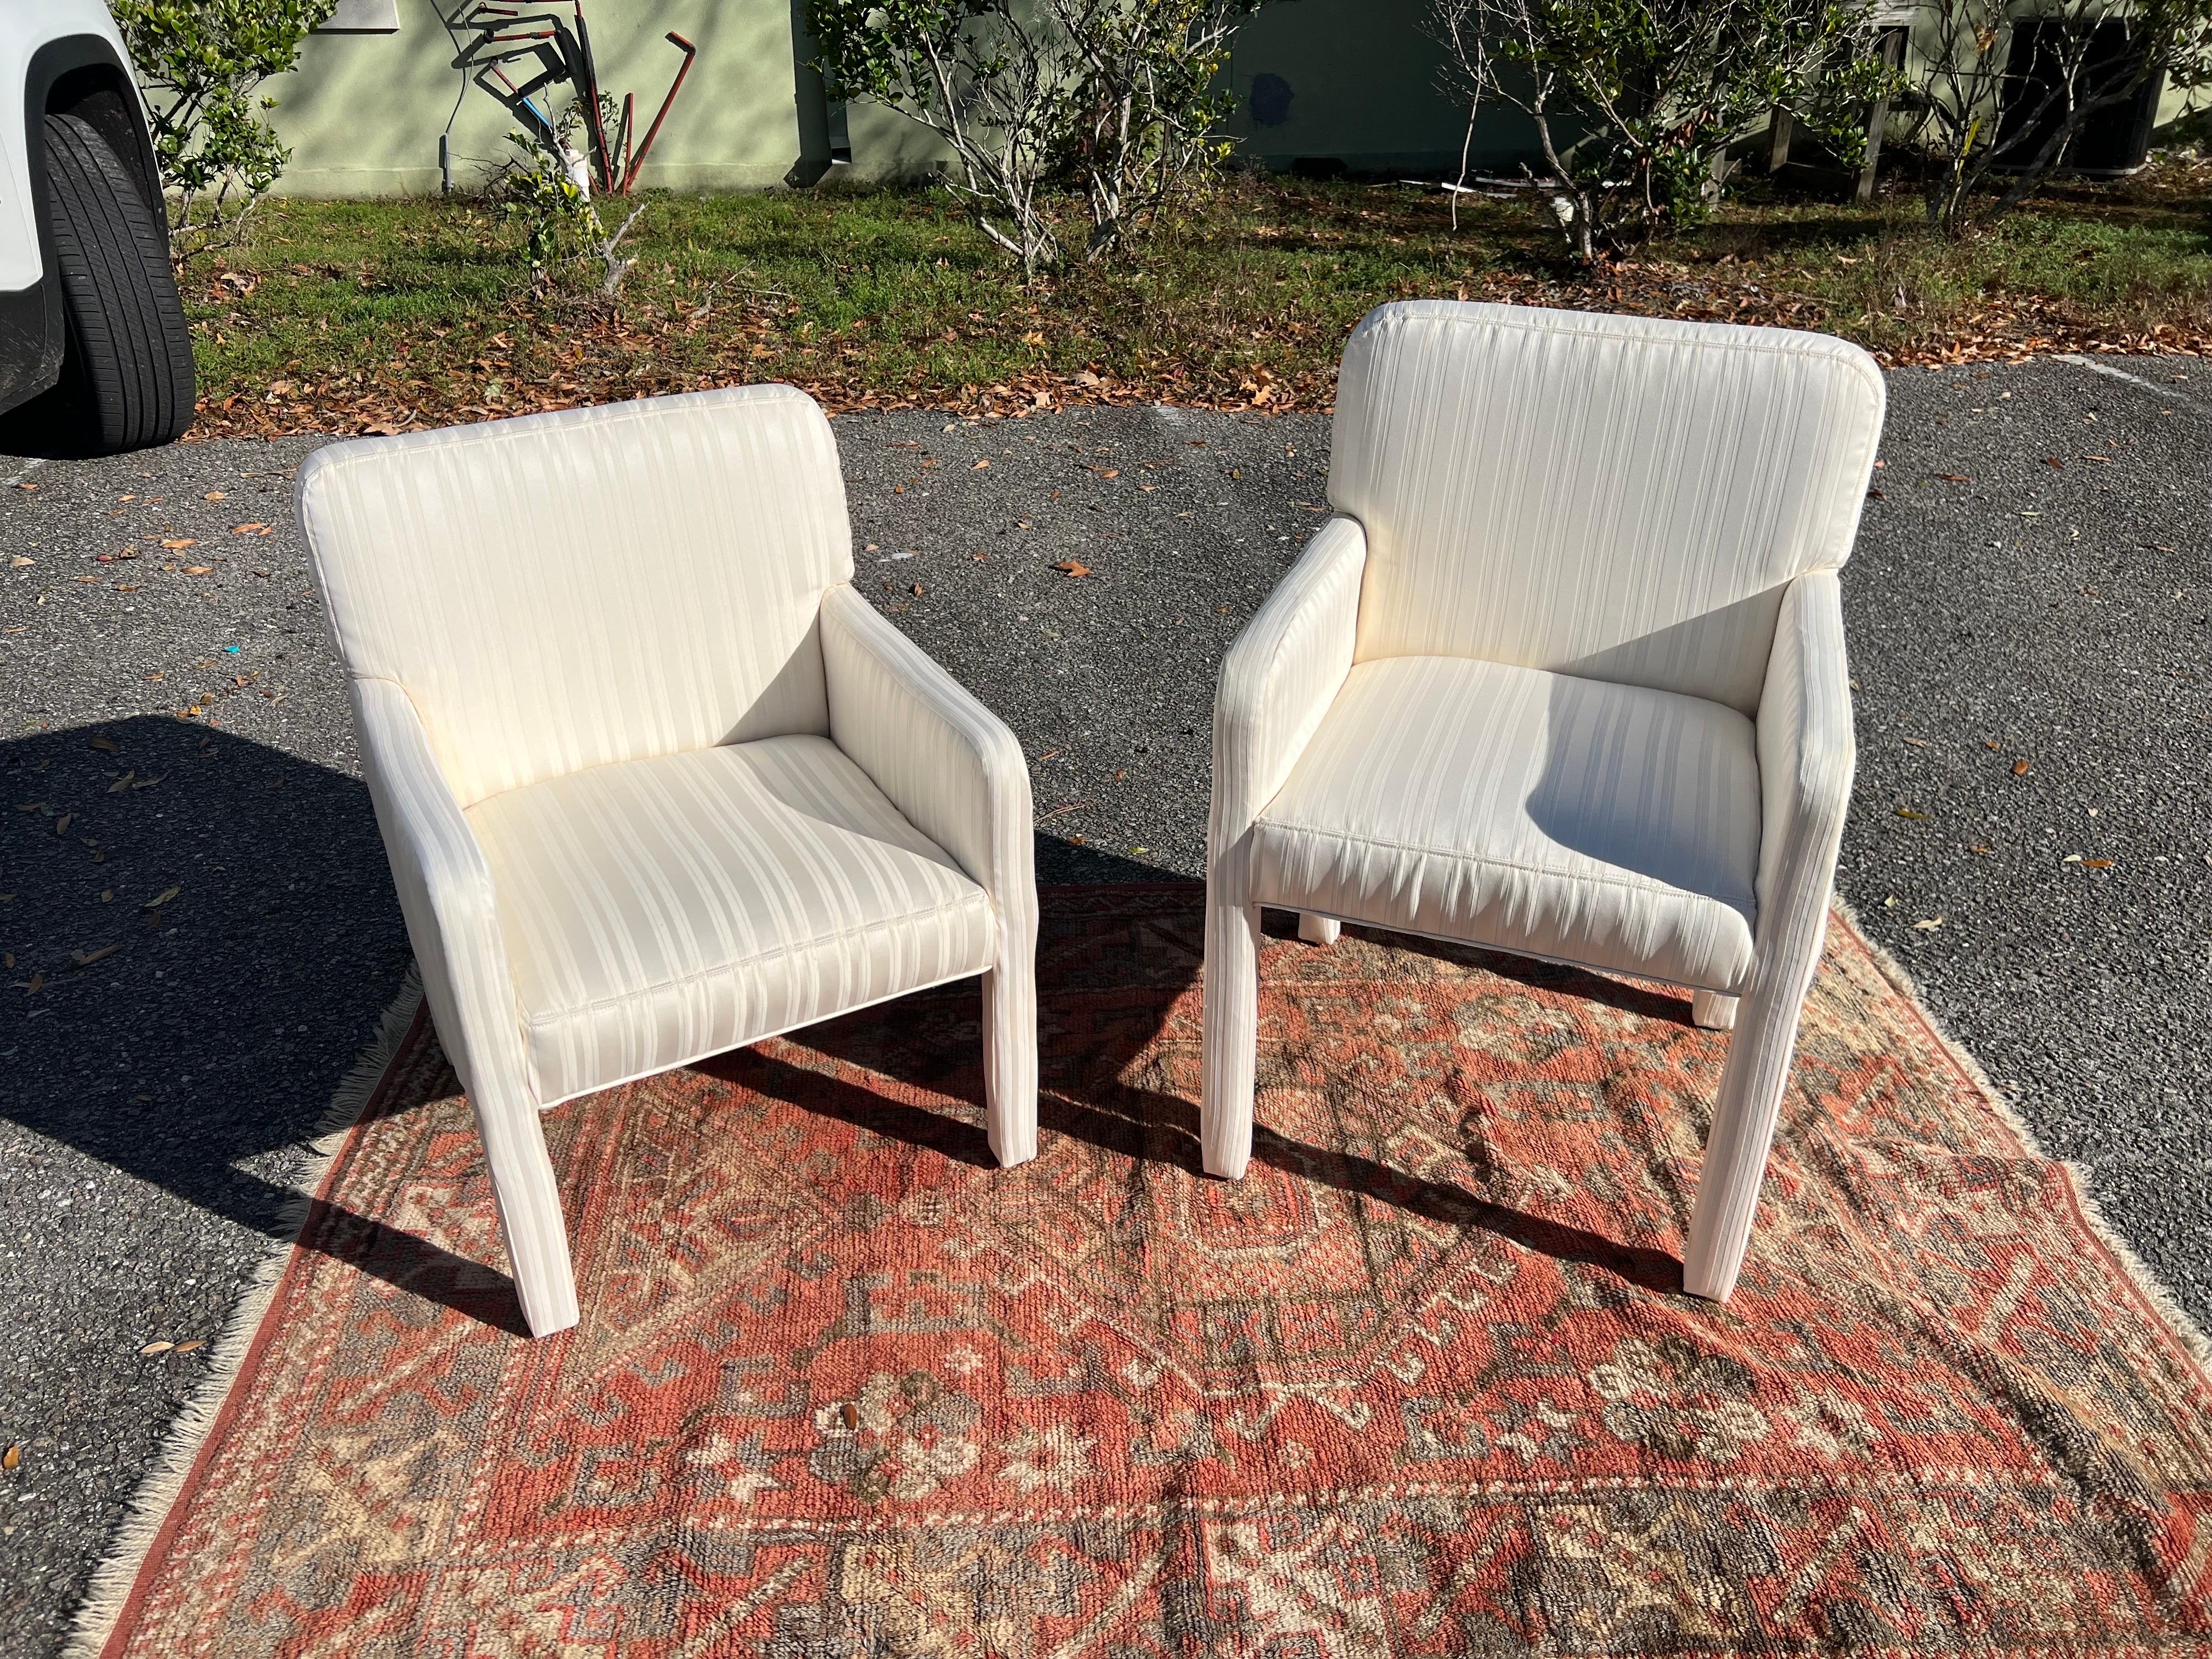 A fabulous set of fully upholstered arm chairs. 
VLADIMIR KAGAN DESIGNED A NUMBER OF PIECES FOR THE FURNITURE COMPANY DIRECTIONAL, ALTHOUGH WE COULDN'T FIND MORE INFORMATION IF HE DESIGNED THESE OR NOT. THESE COULD VERY WELL BE A SET OF ONE-OFF